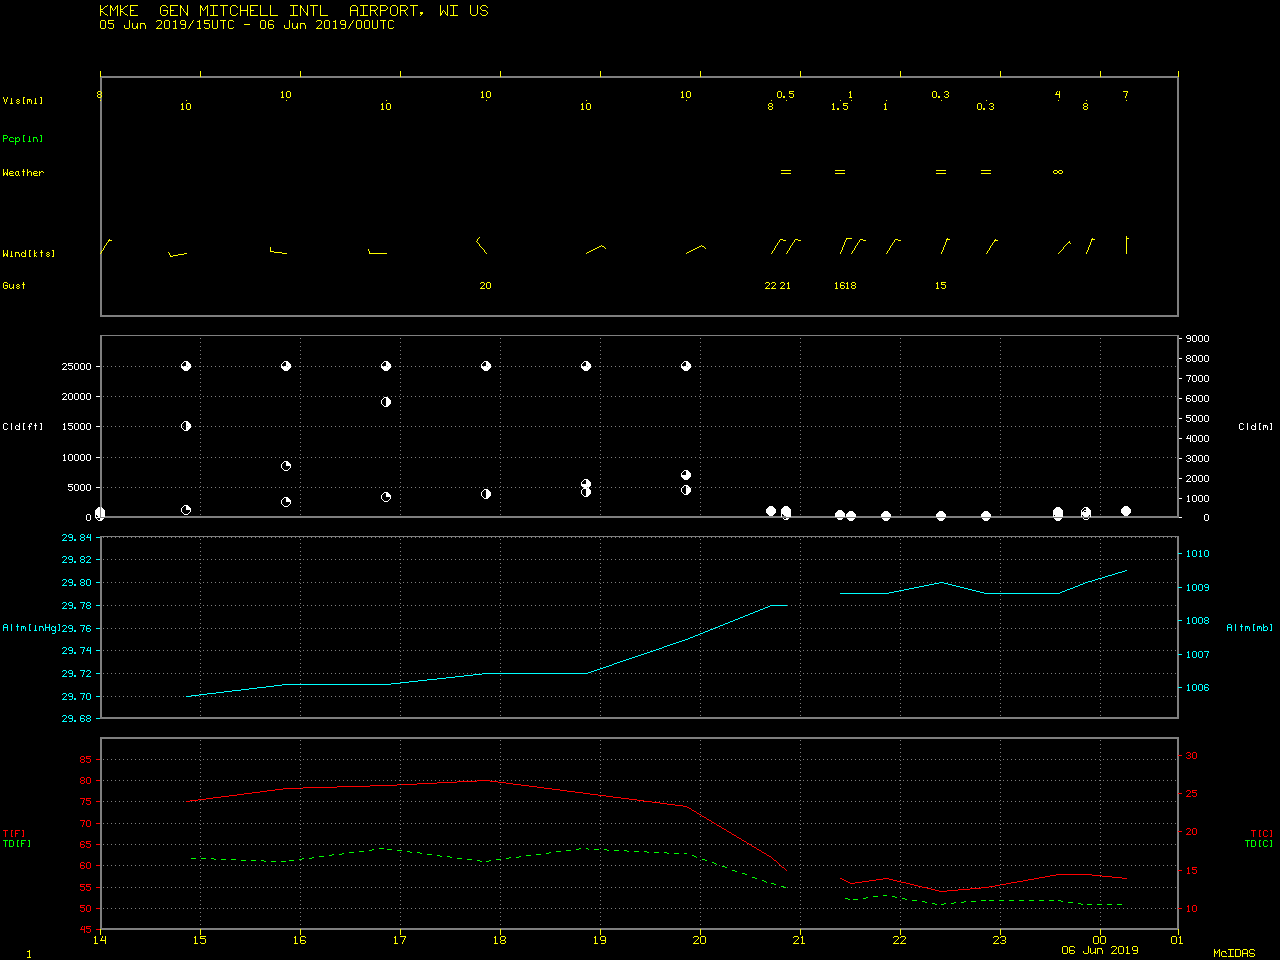 Time series plot of surface reports from Milwaukee Mitchell International Airport [click to enlarge]